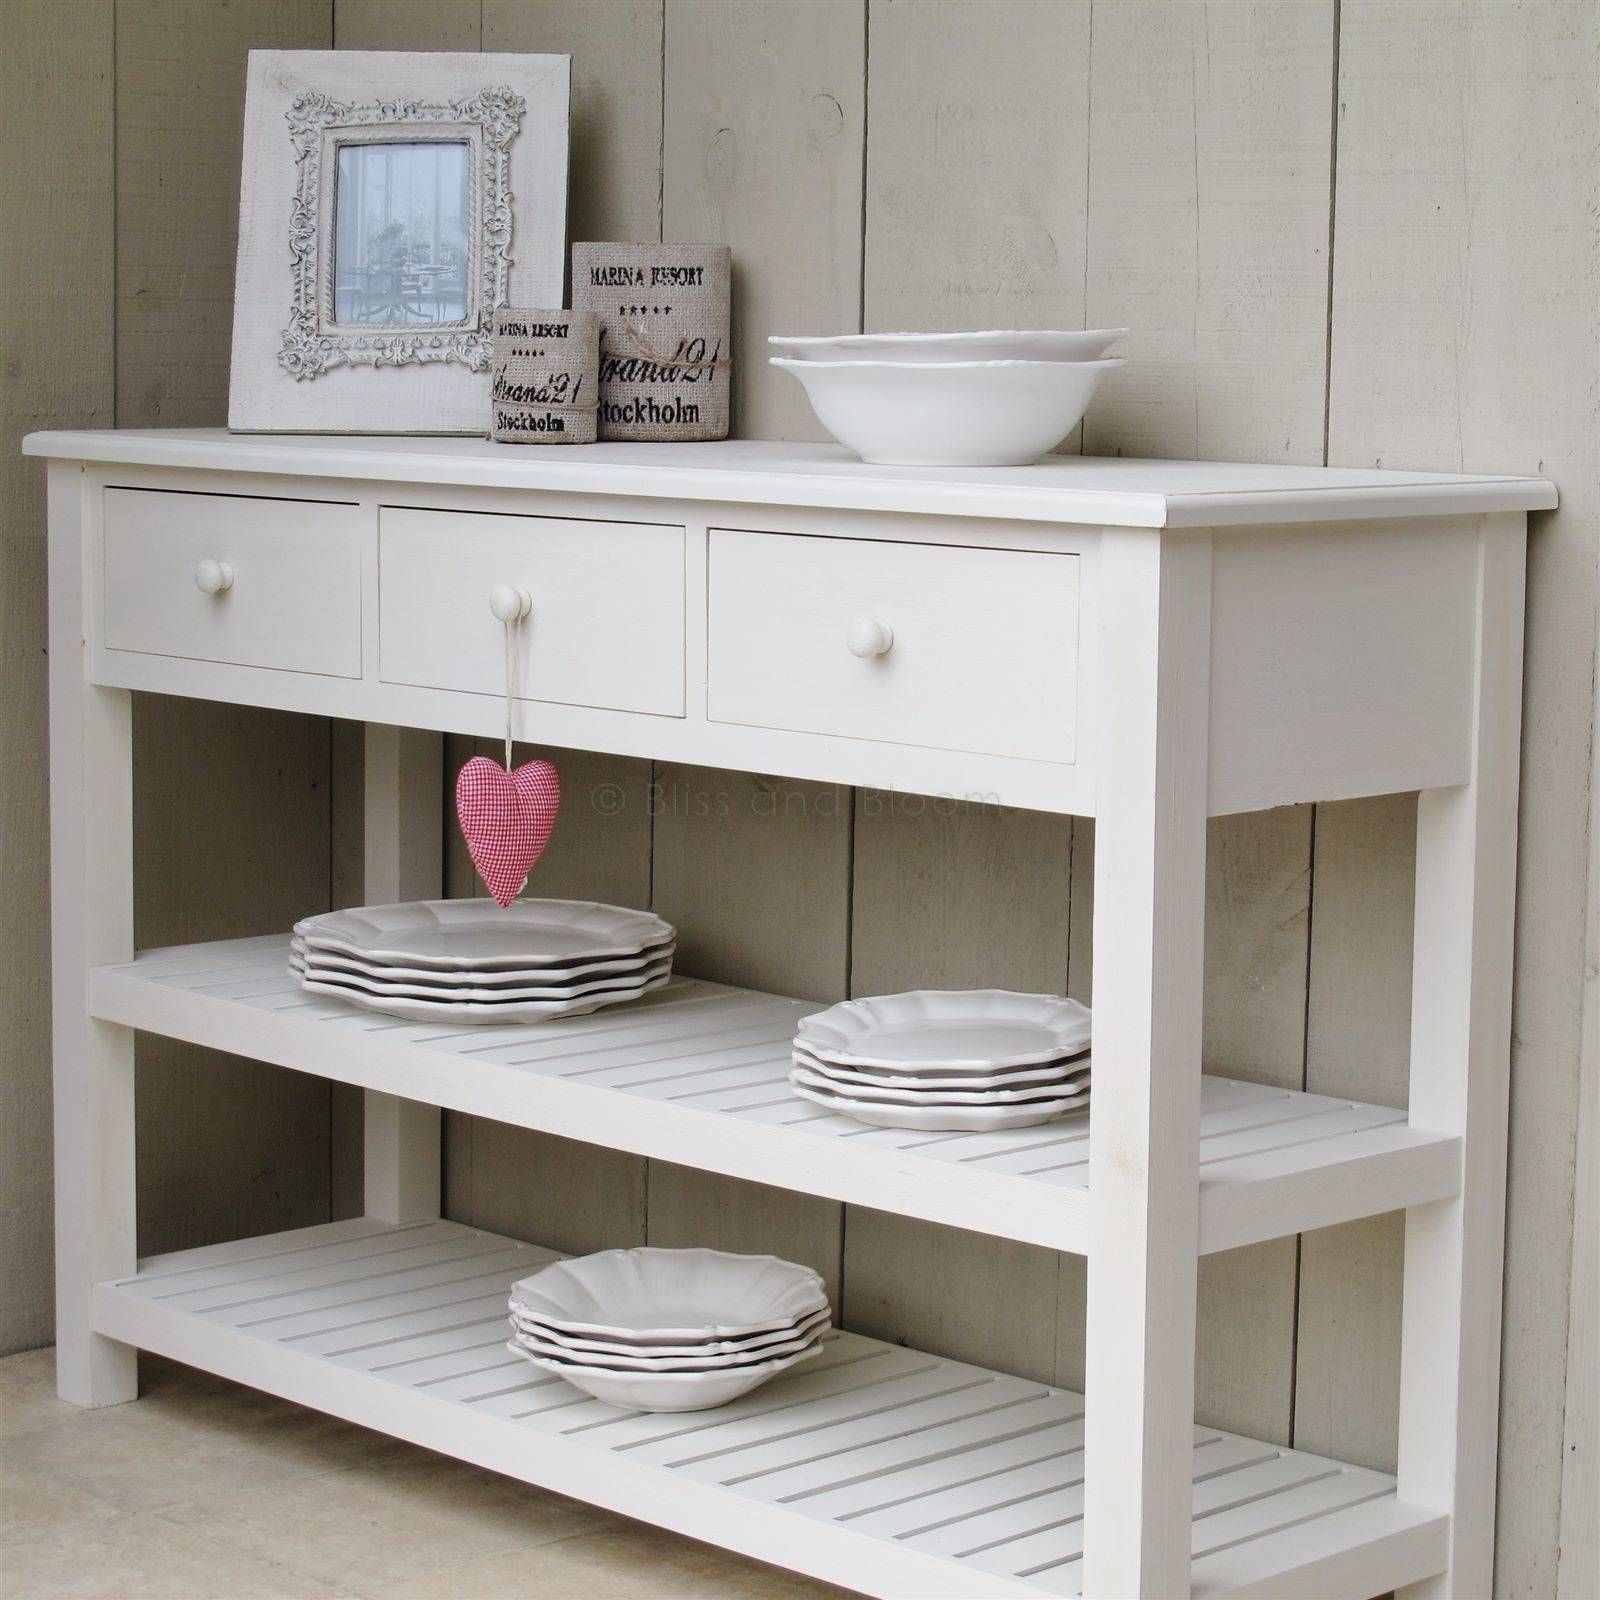 Best Of White Sideboard Table – Bjdgjy Throughout Most Up To Date White Sideboard Tables (View 9 of 15)